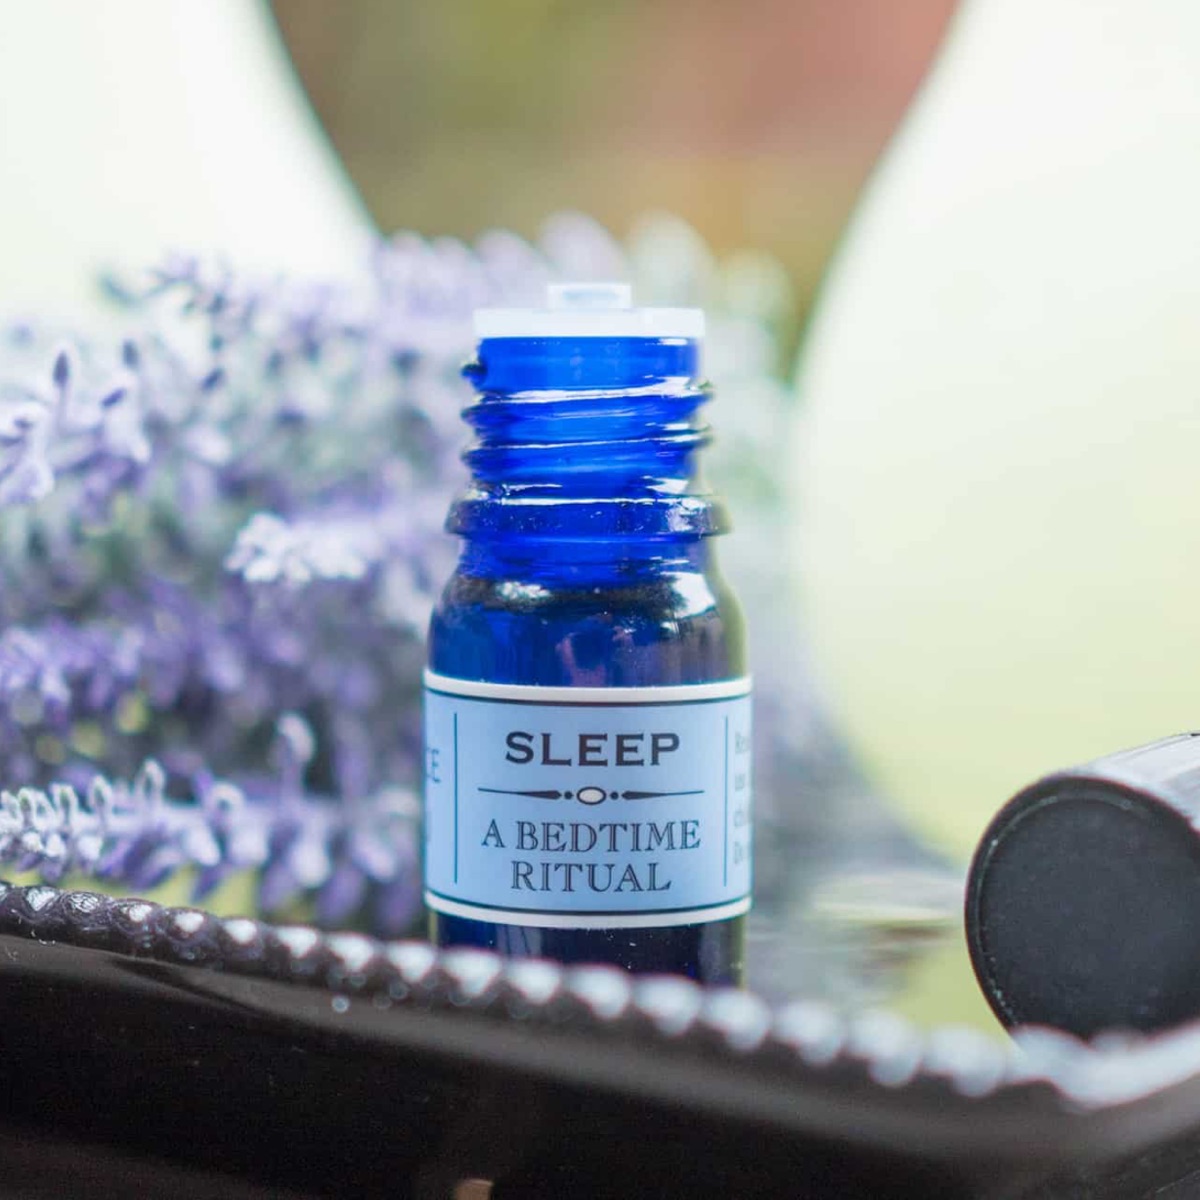 A blue bottle of essential oils by the brand Essense of Vali called sleep.